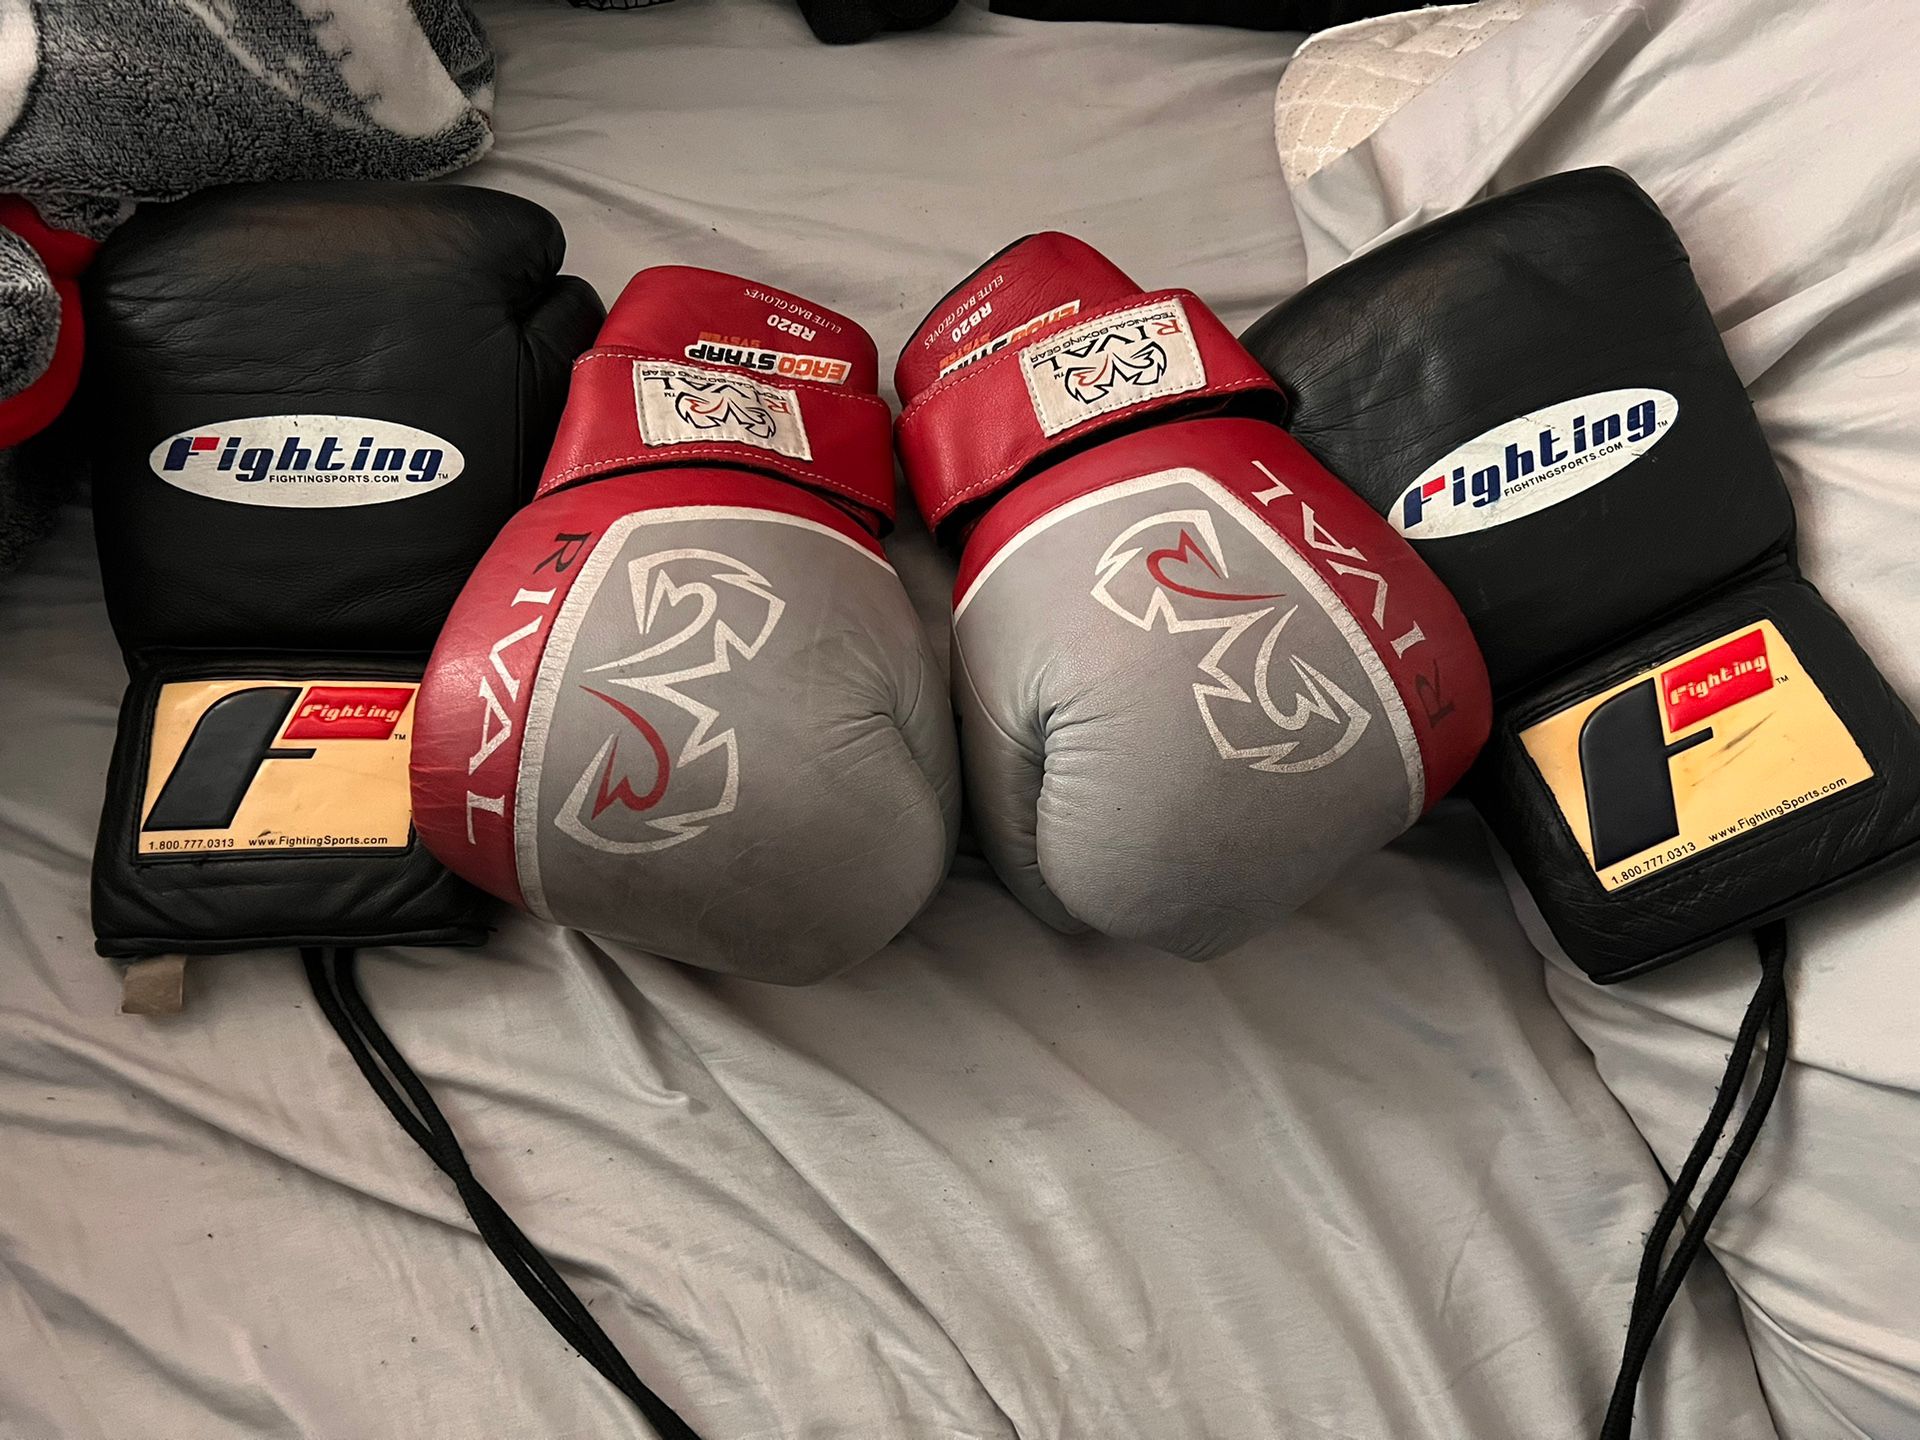 Old Training Gloves $30